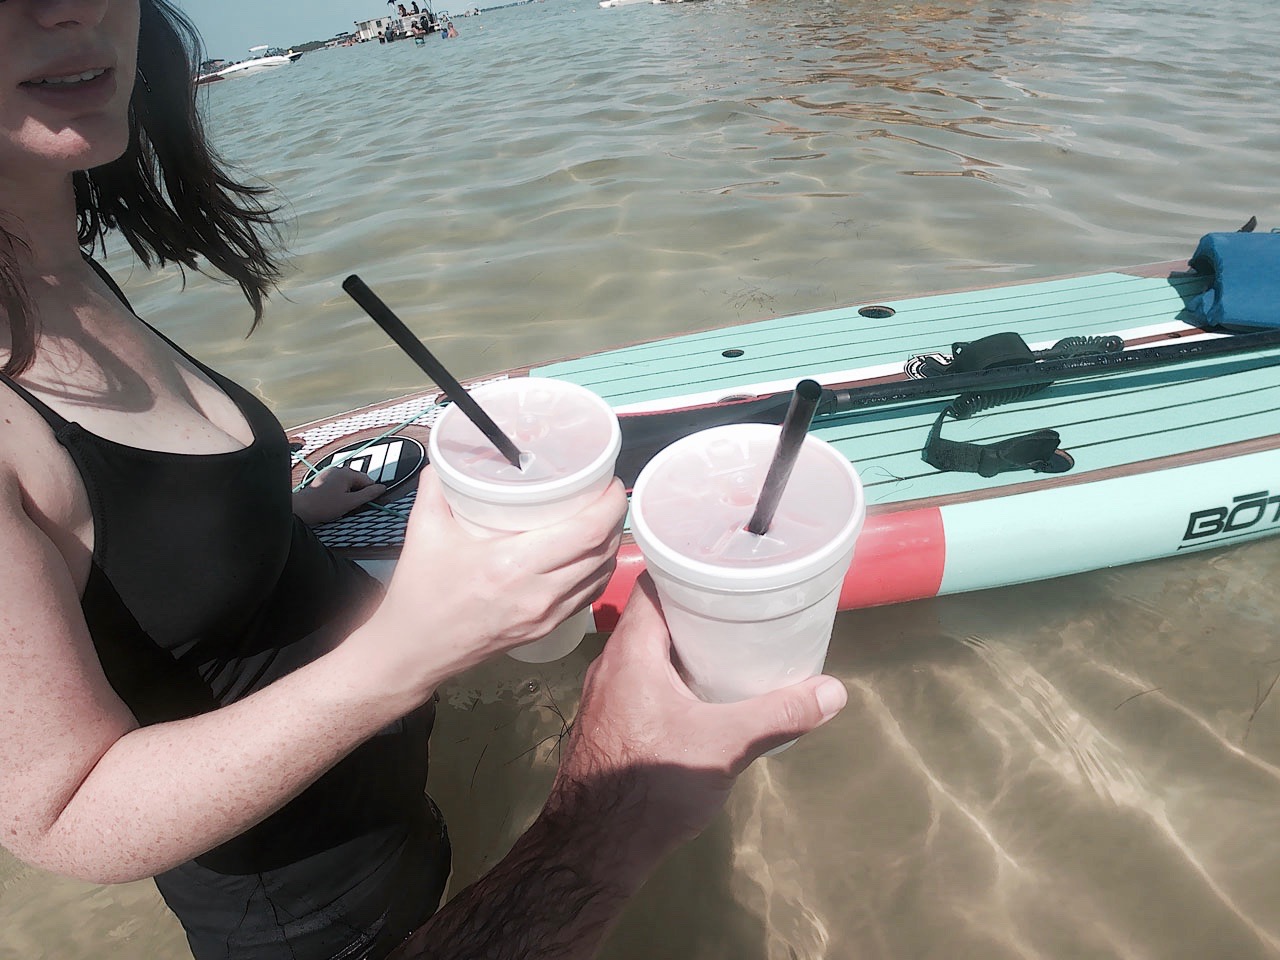 Alyssa and Michael "cheers" with daiquiris on their paddleboards